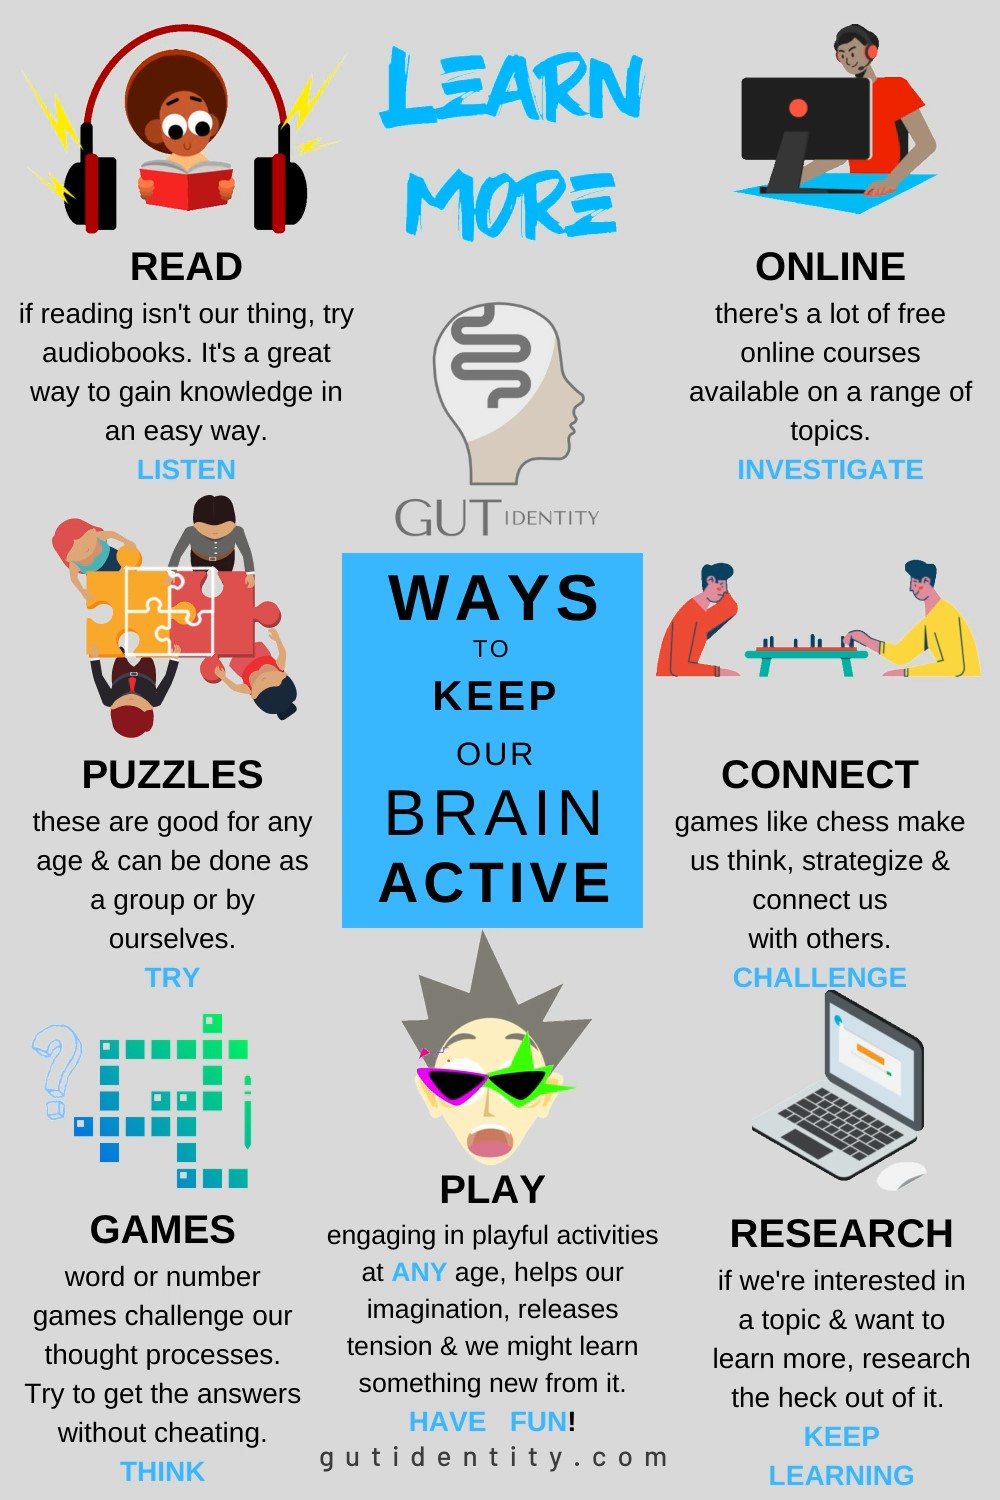 Ways to keep our brain active by Gutidentity